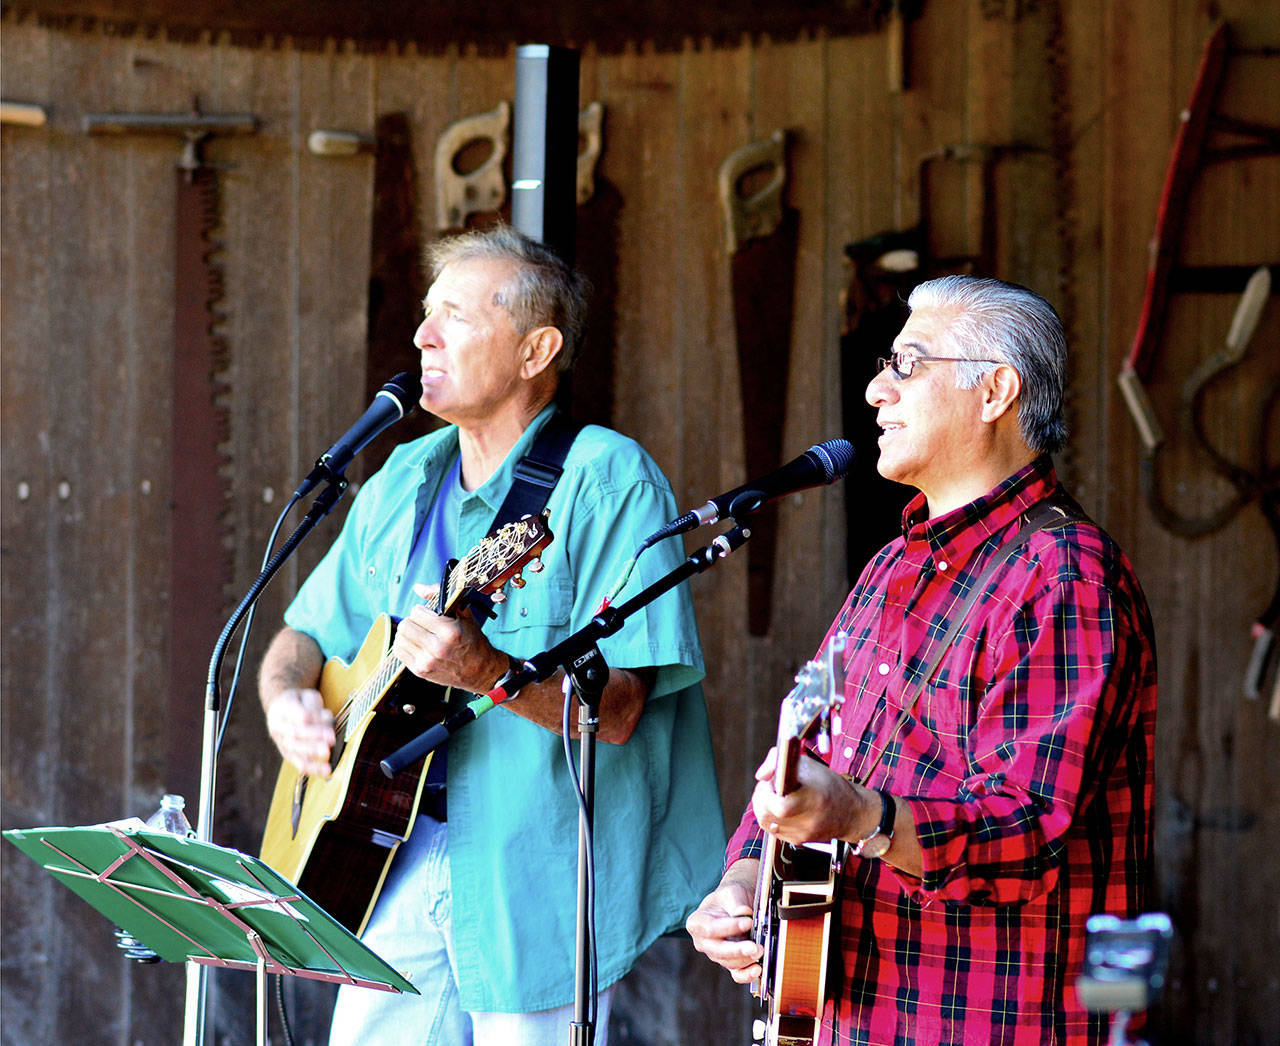 Bill Tiderman, left, and Rudy Maxion will start Sequim’s Men with Guitars concert with a singalong Saturday.